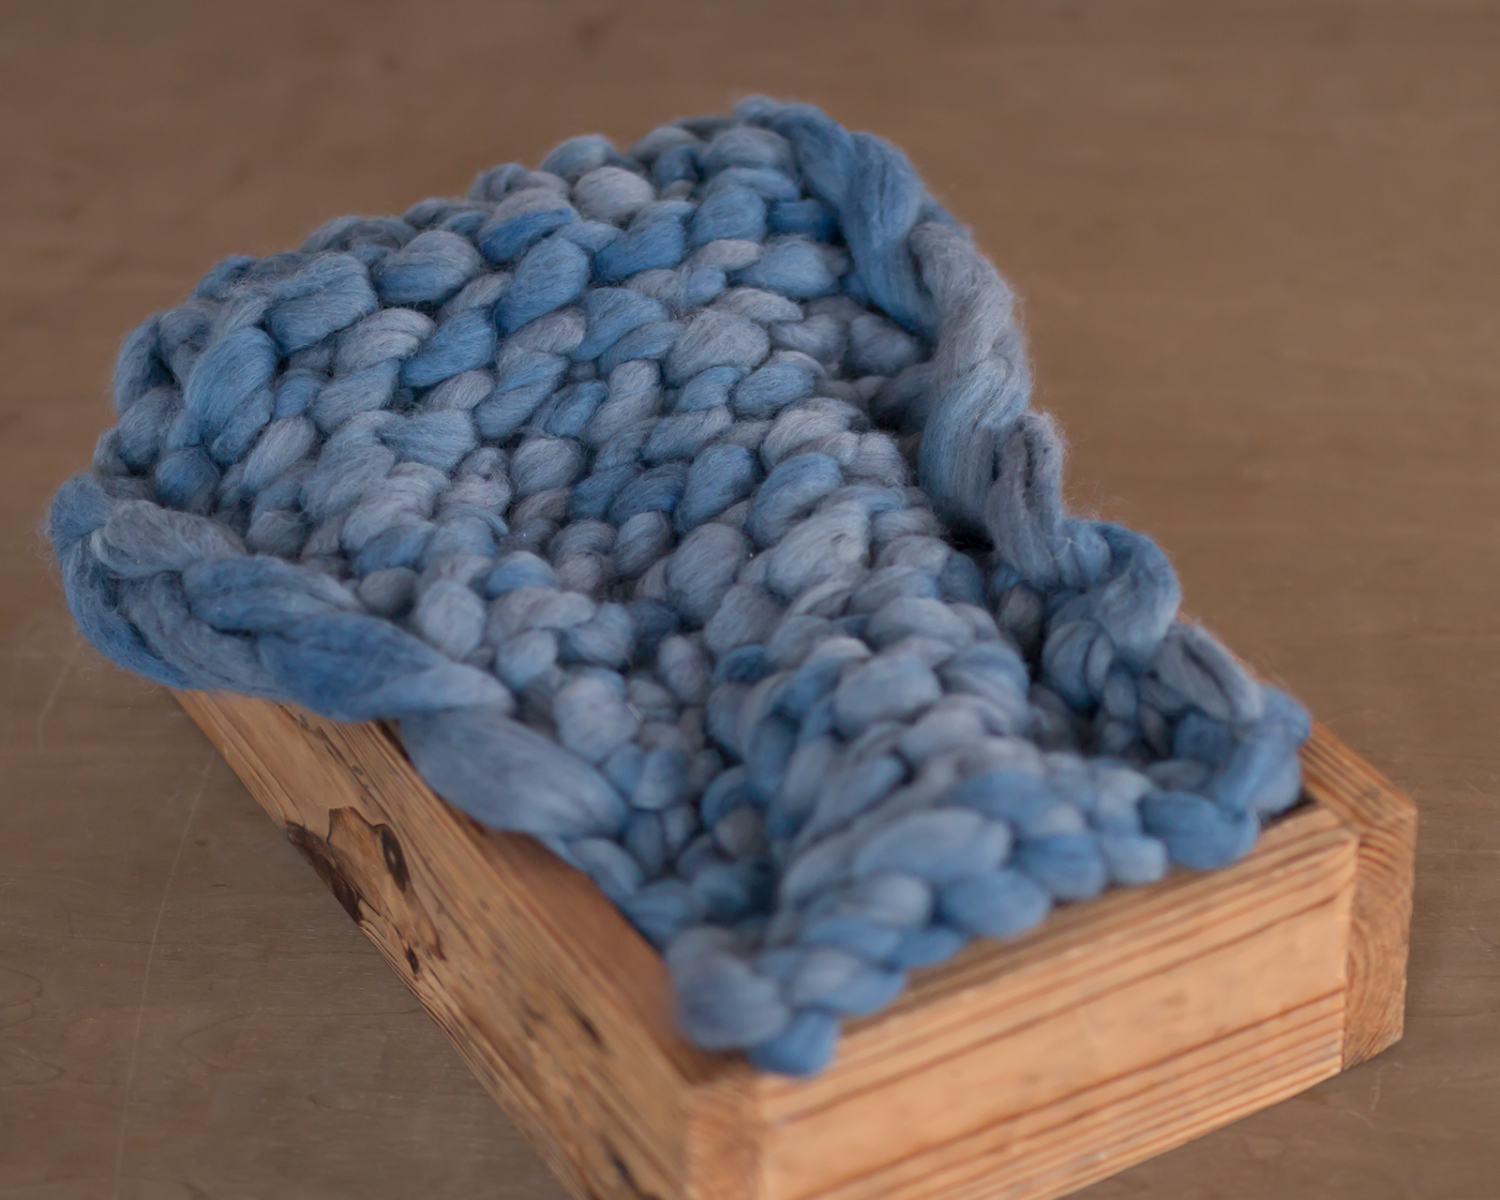 Middle blue Mini Blanket / Layer